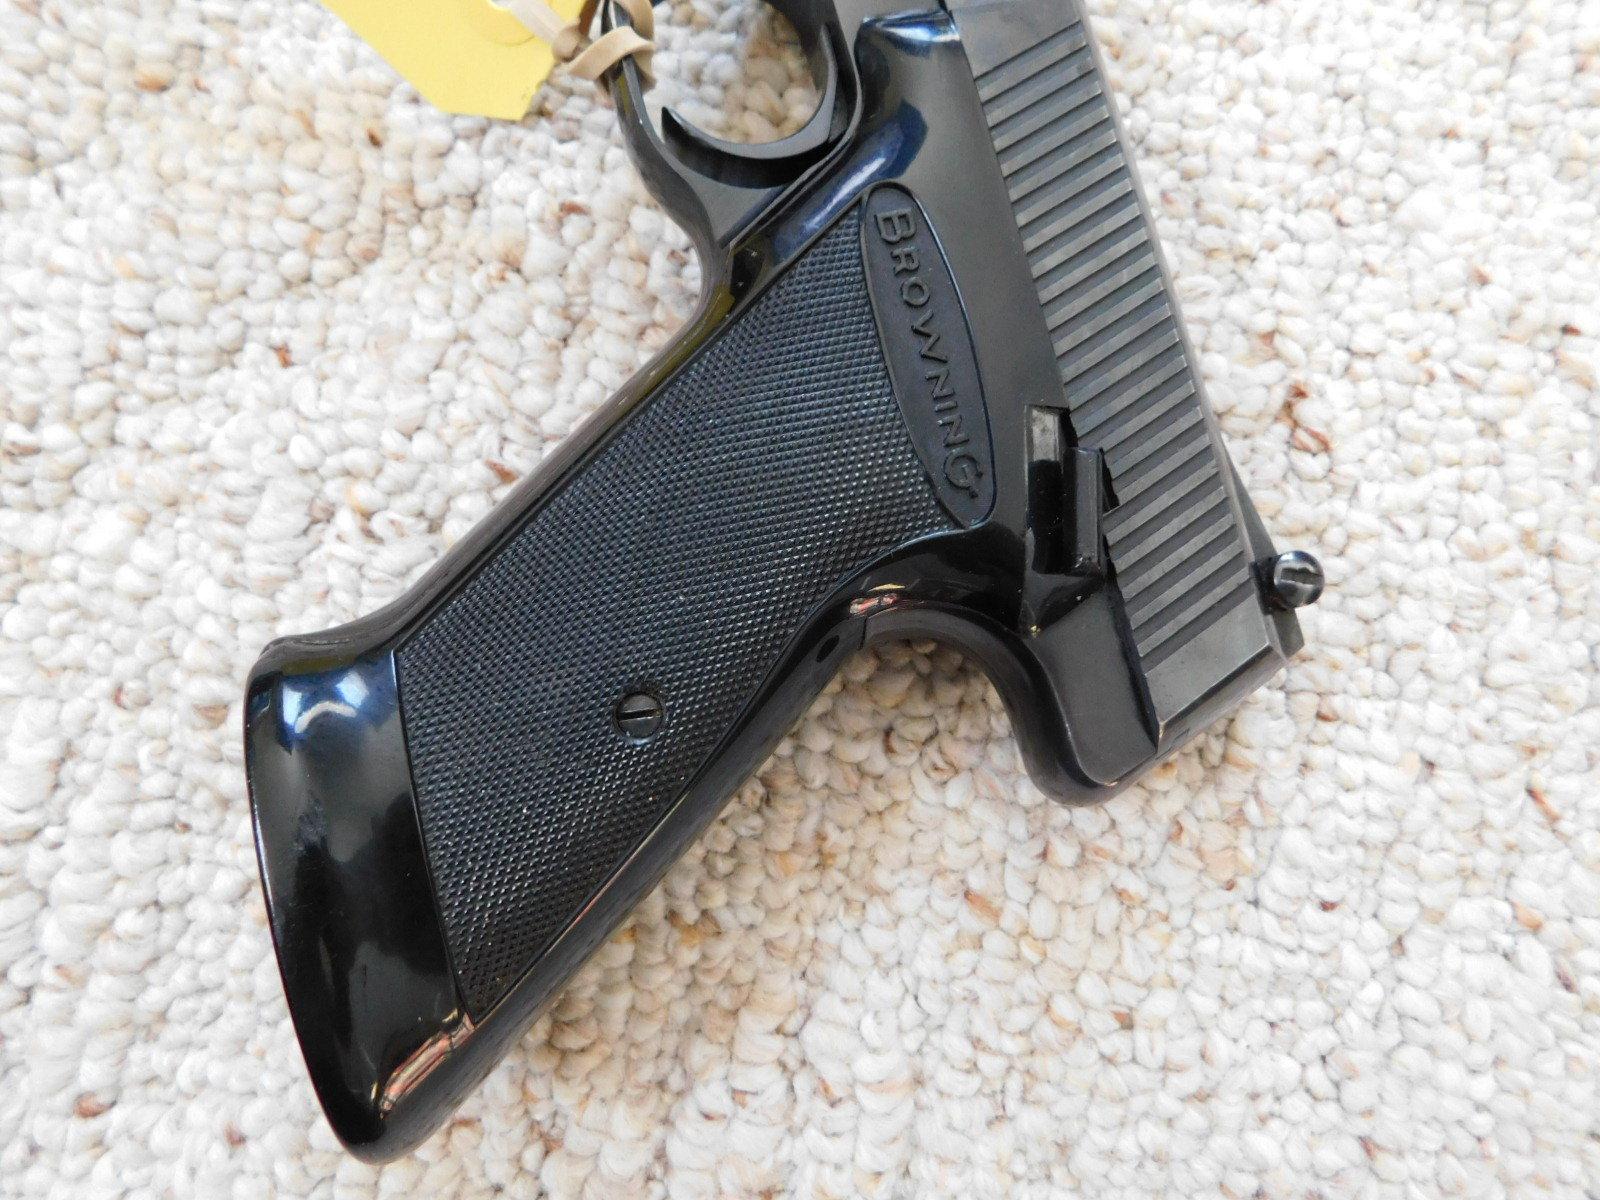 BROWNING CHALLENGER .22 LR CAL AUTO PISTOL W/ LEATHER HOLSTER